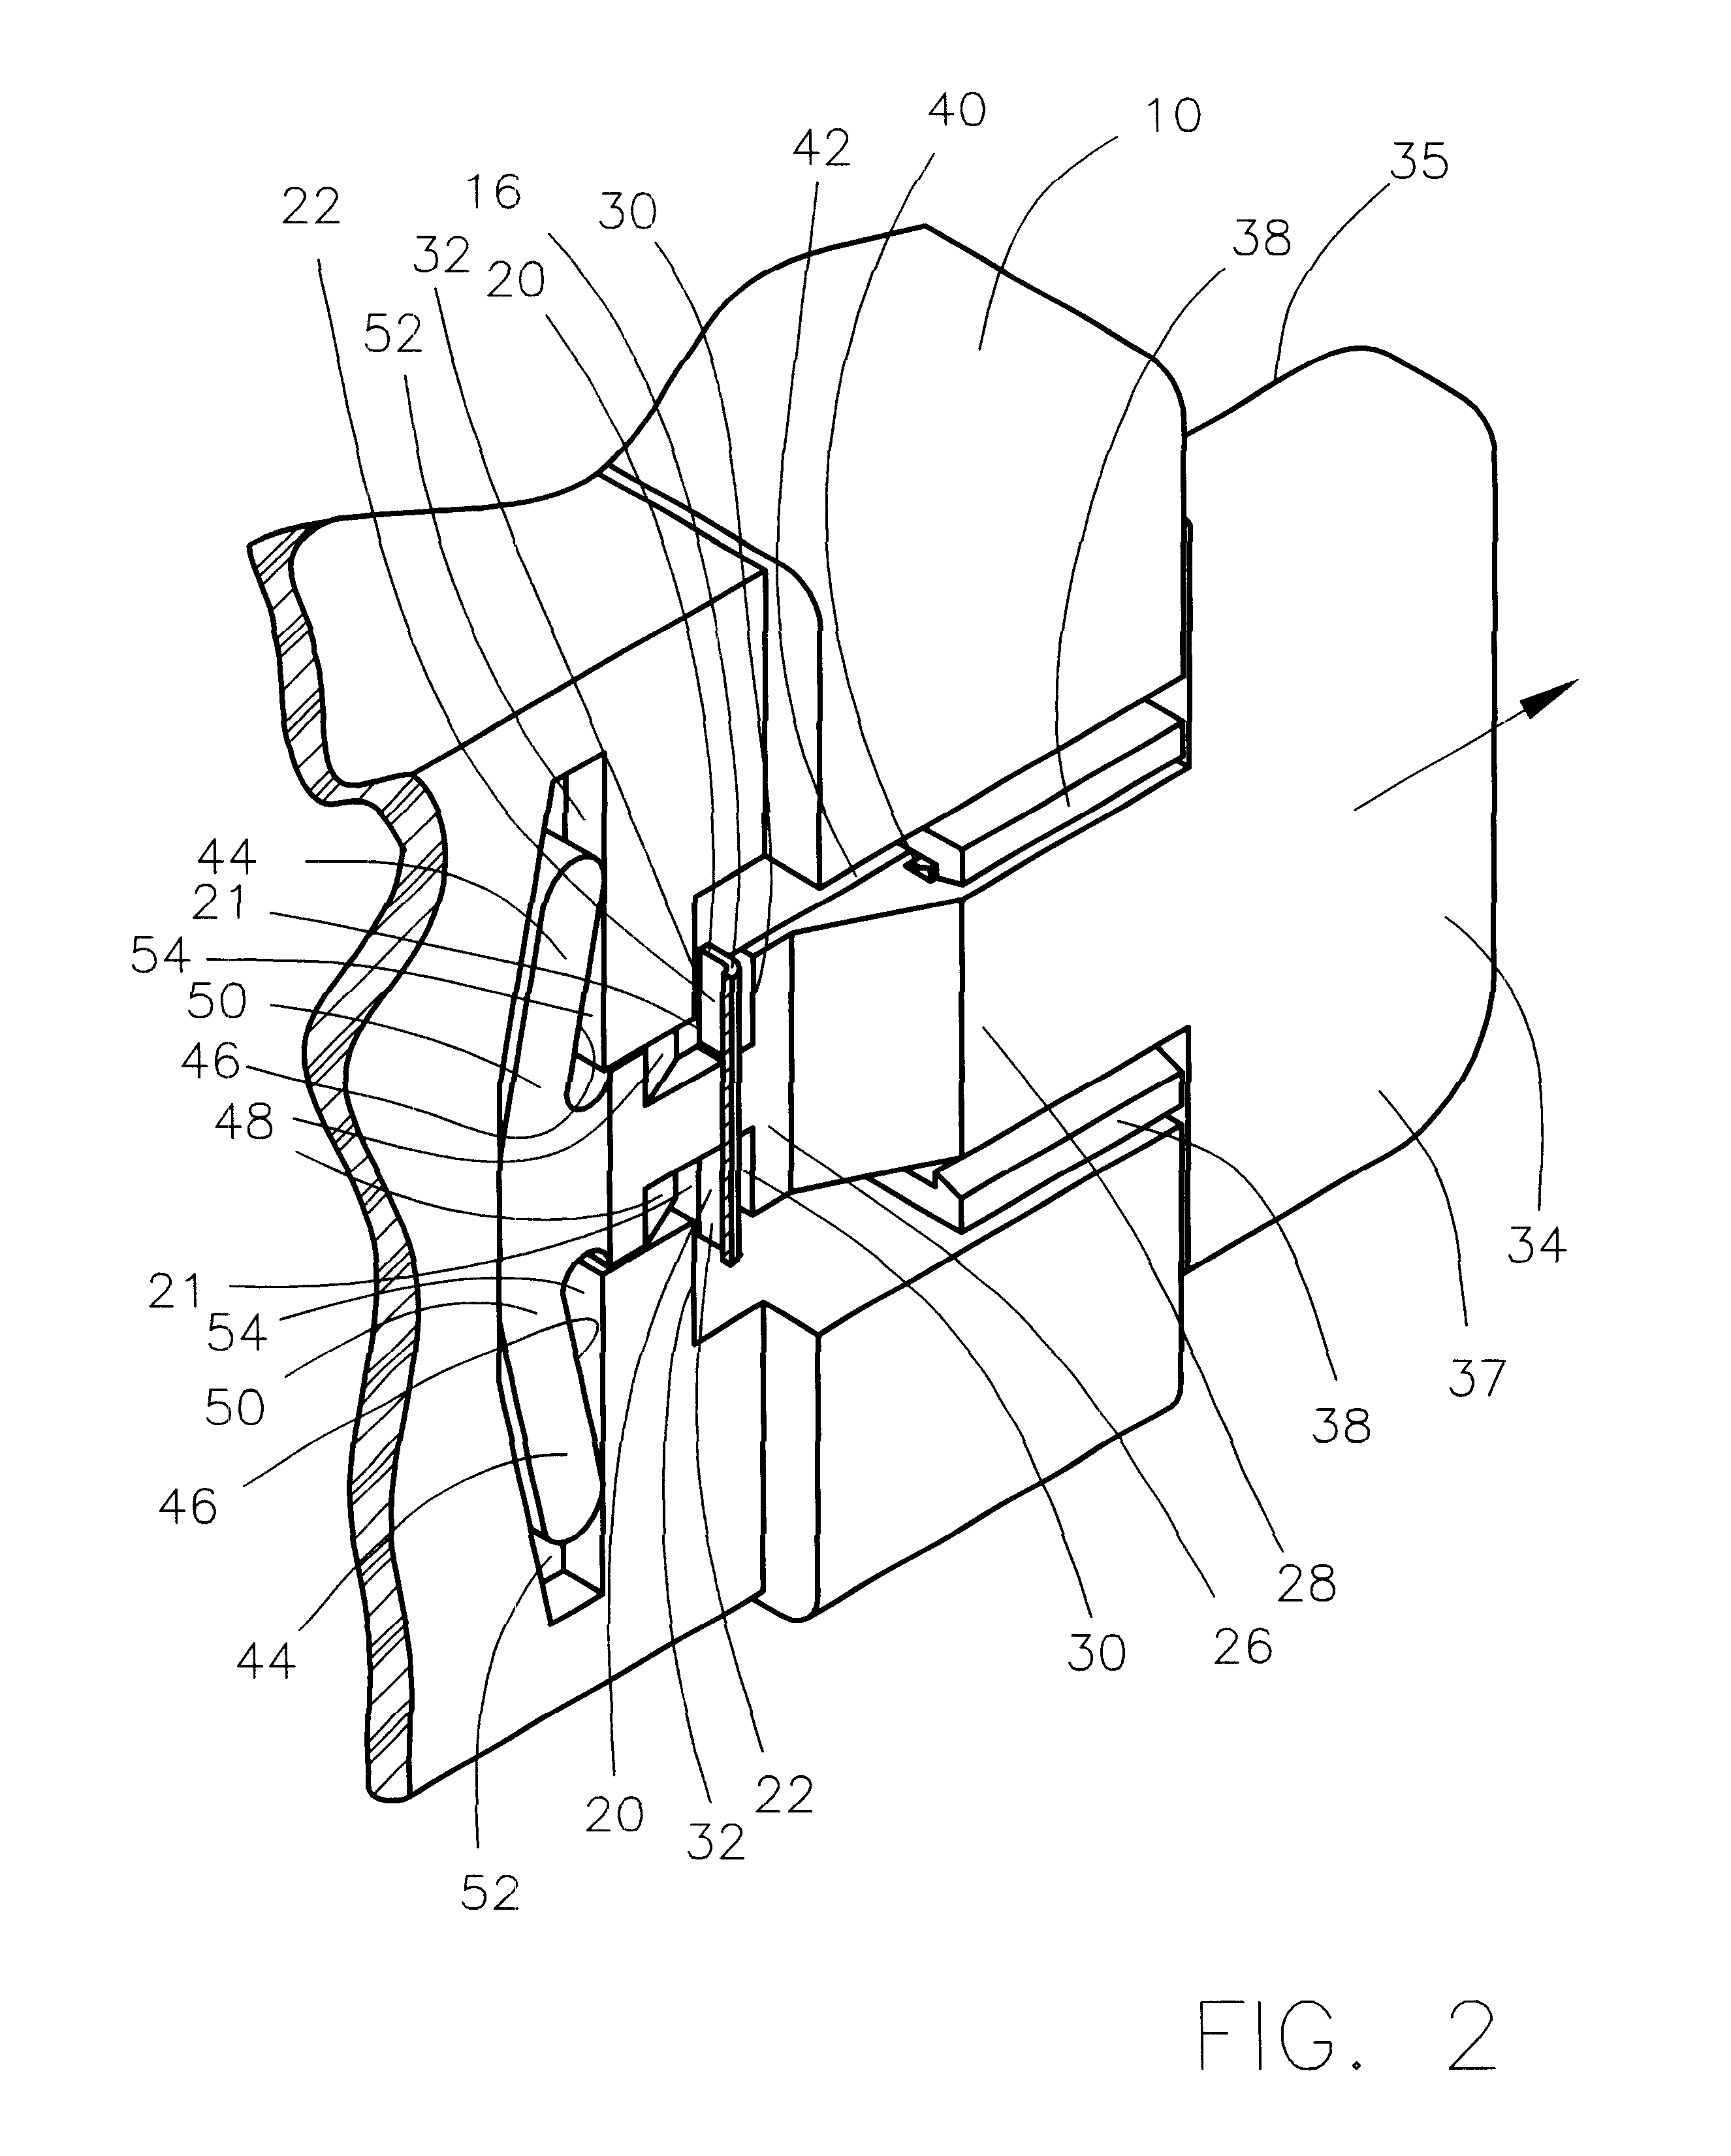 Pull-to-release type latch mechanism for removable small form factor electronic modules